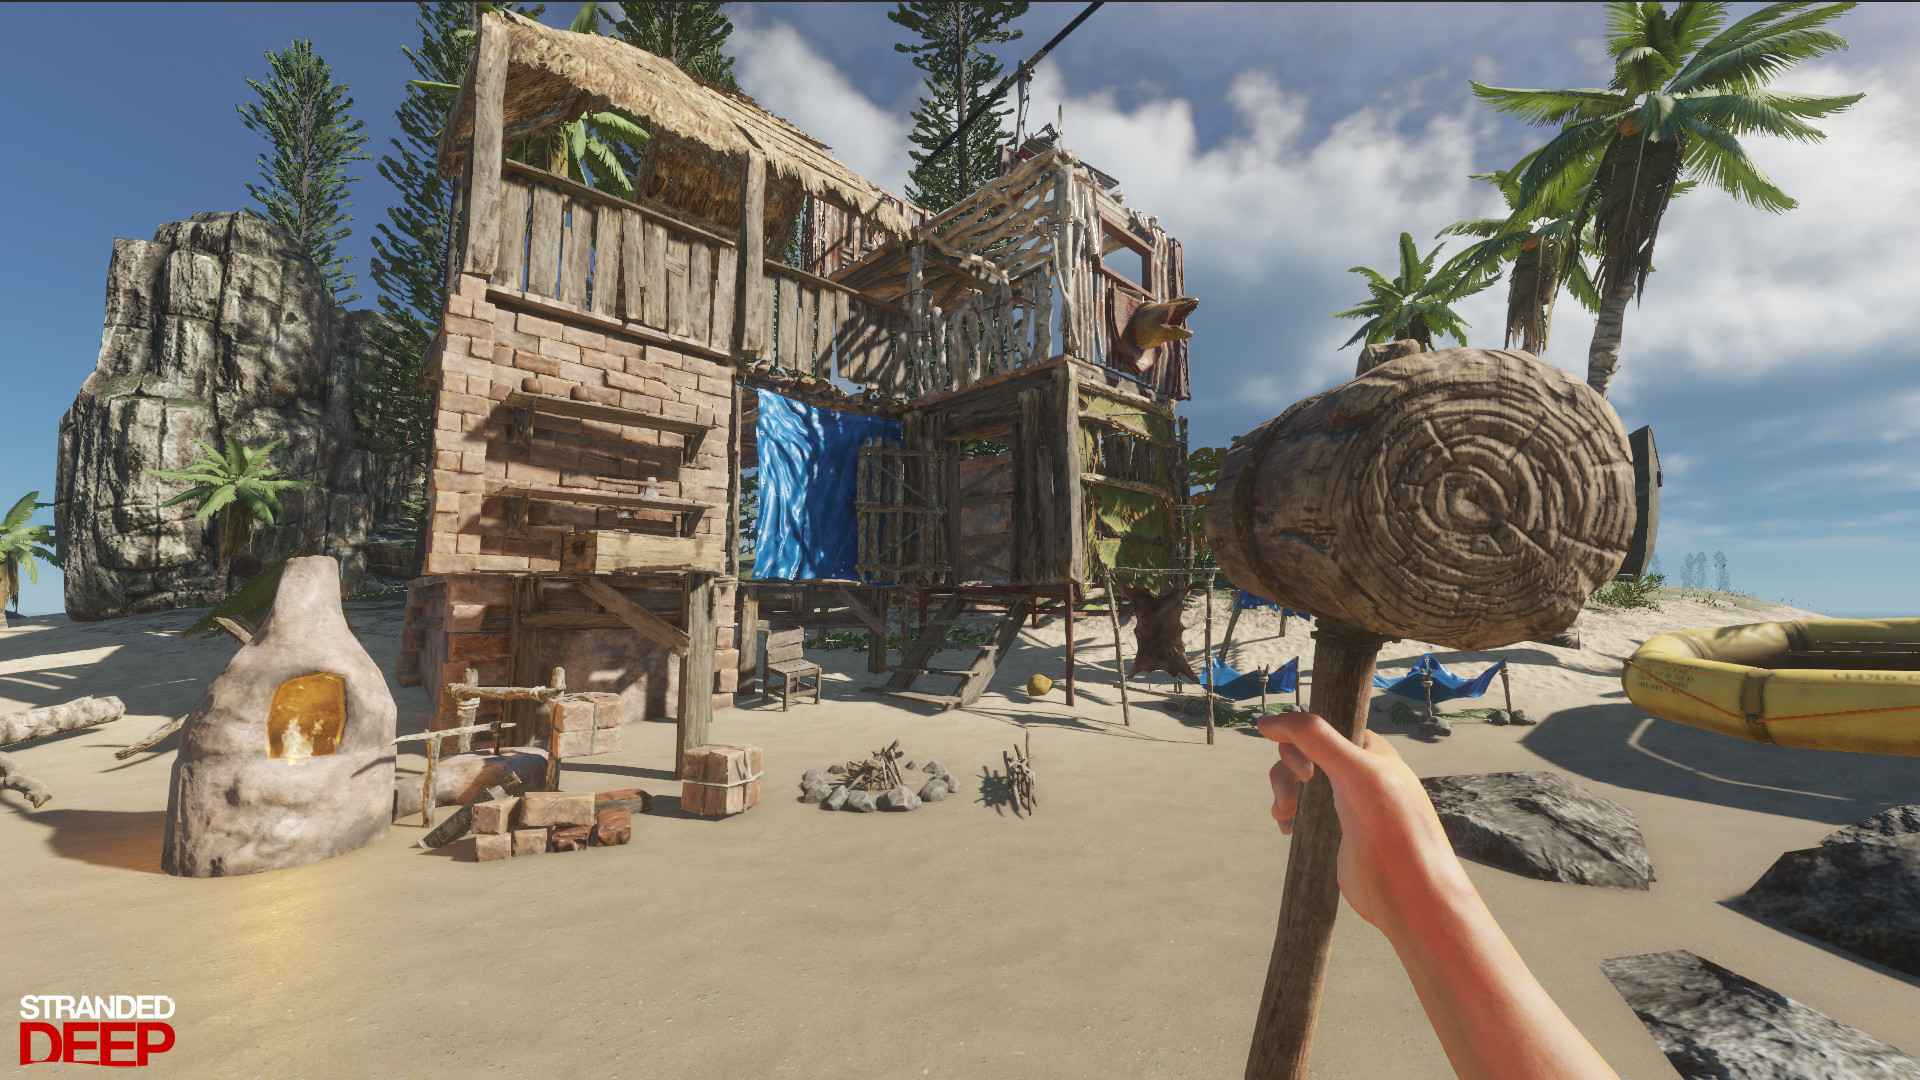 Stranded Deep PS4 Release It Happening?